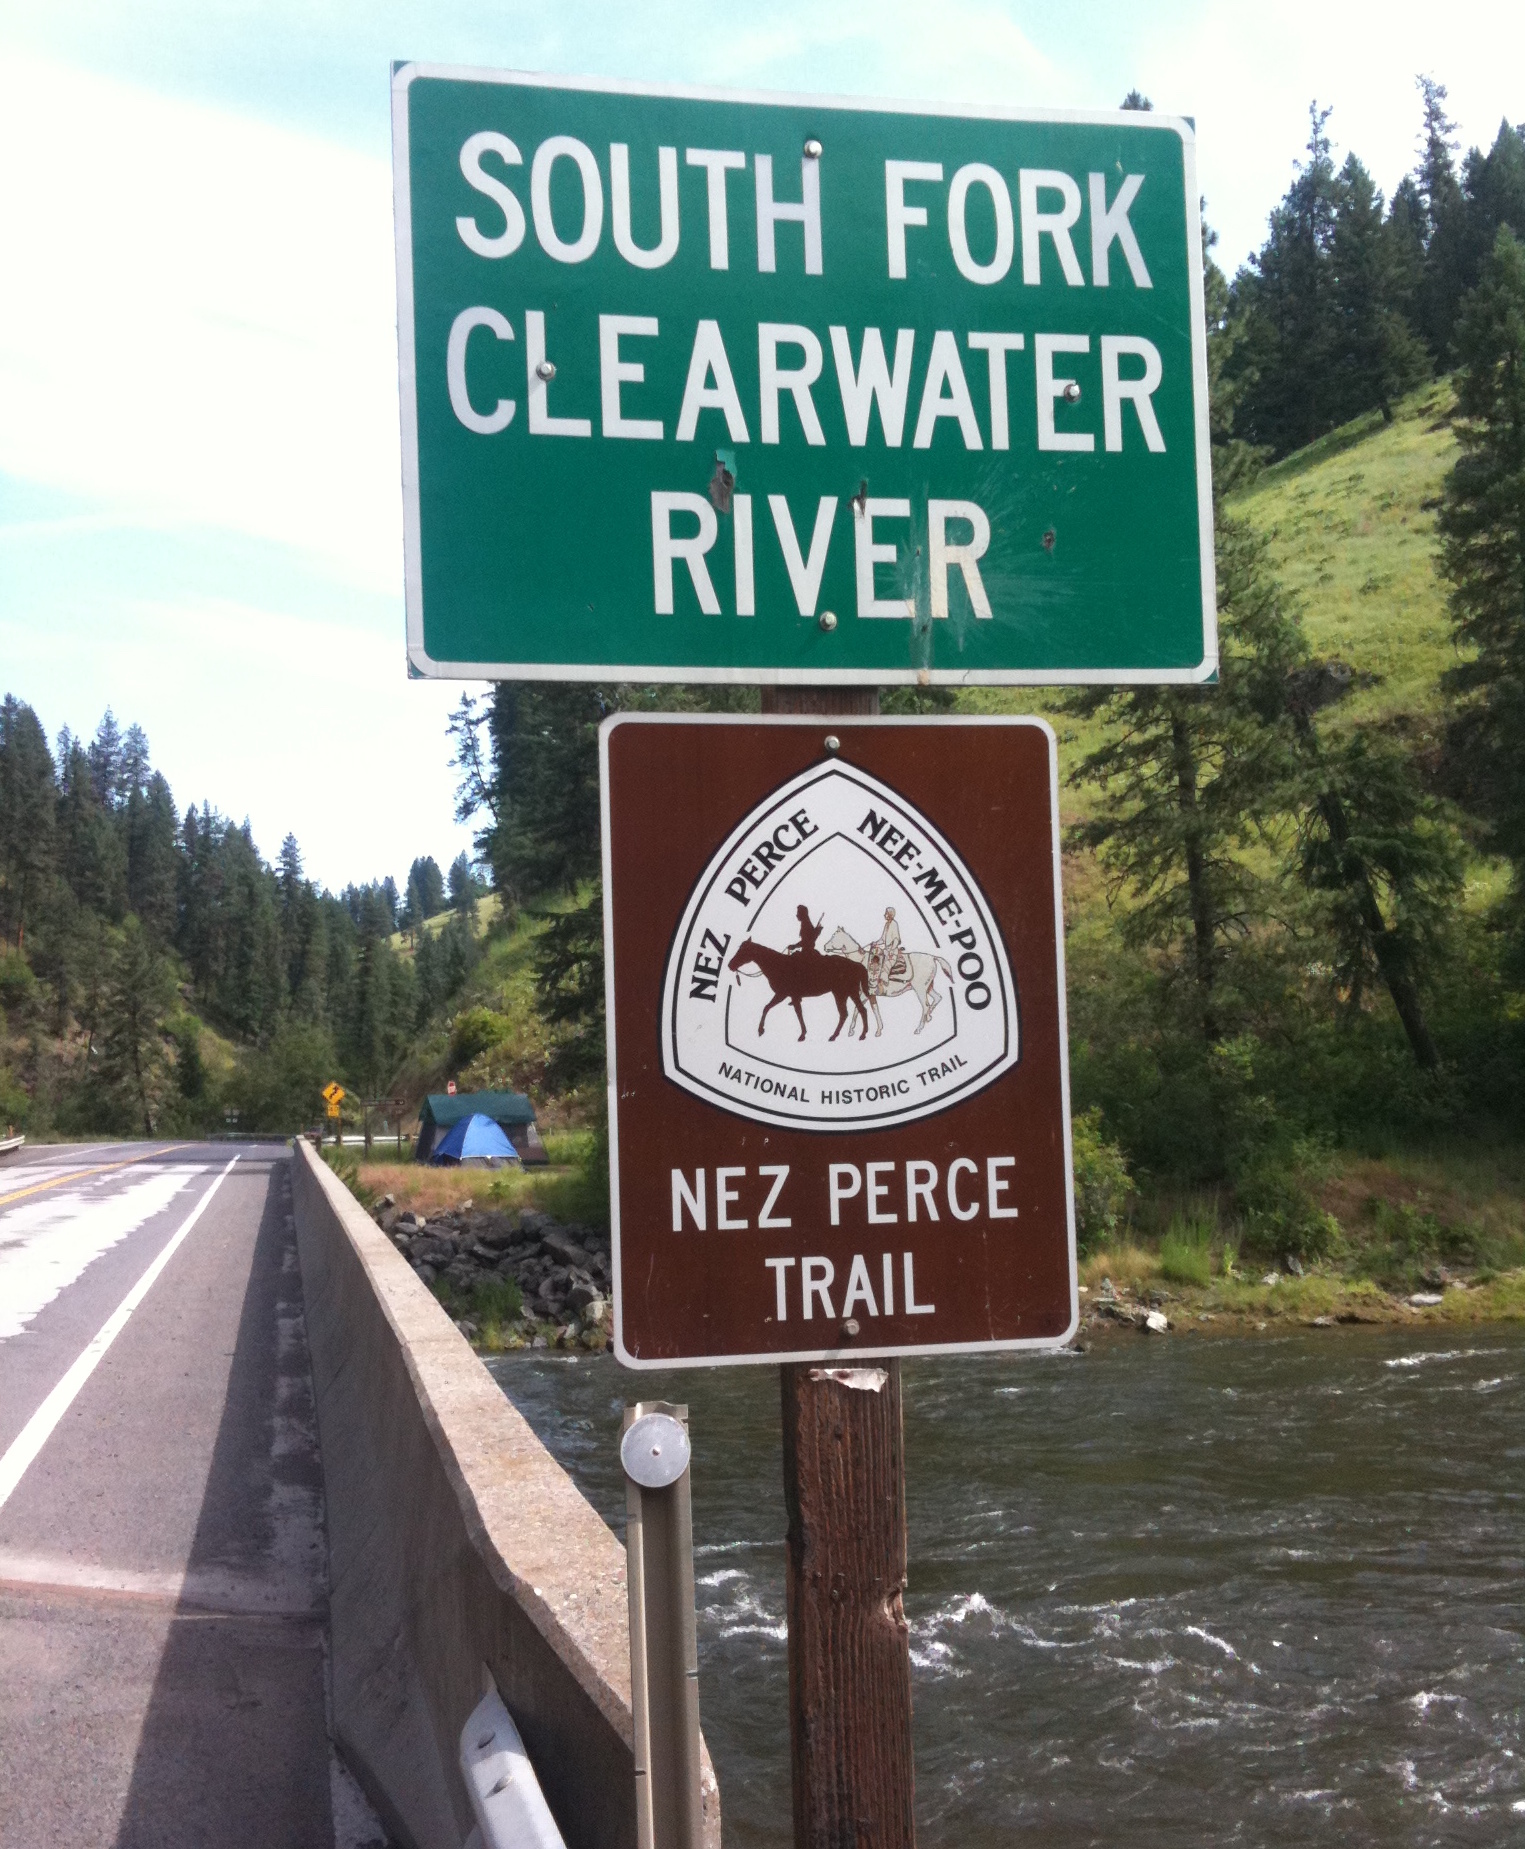 South fork of the Clearwater